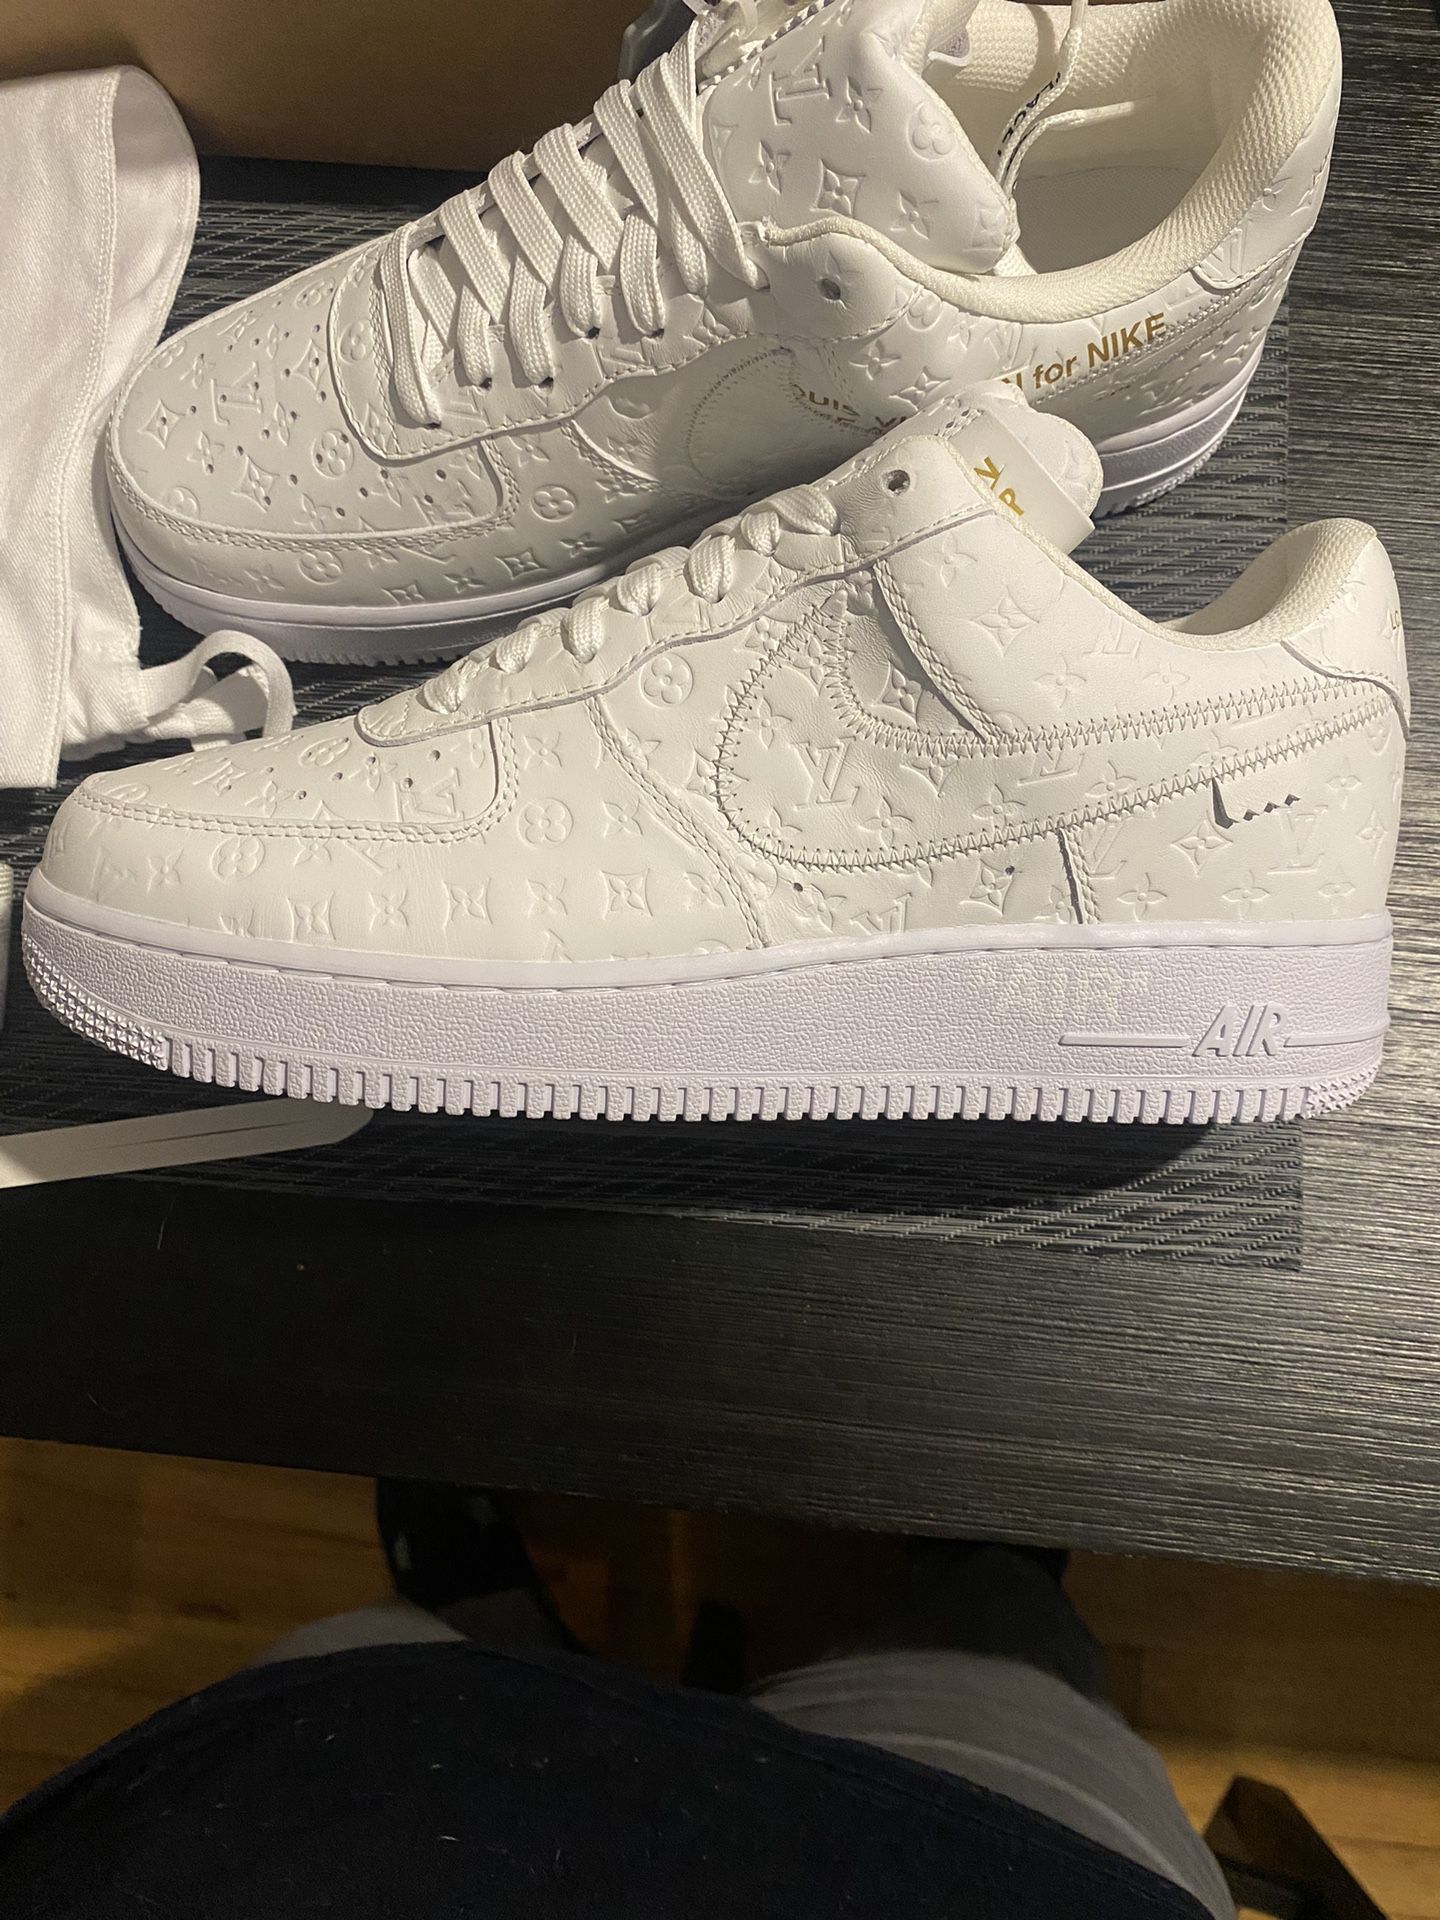 Louis Vuitton Air Force One Nike for Sale in Chicago, IL - OfferUp